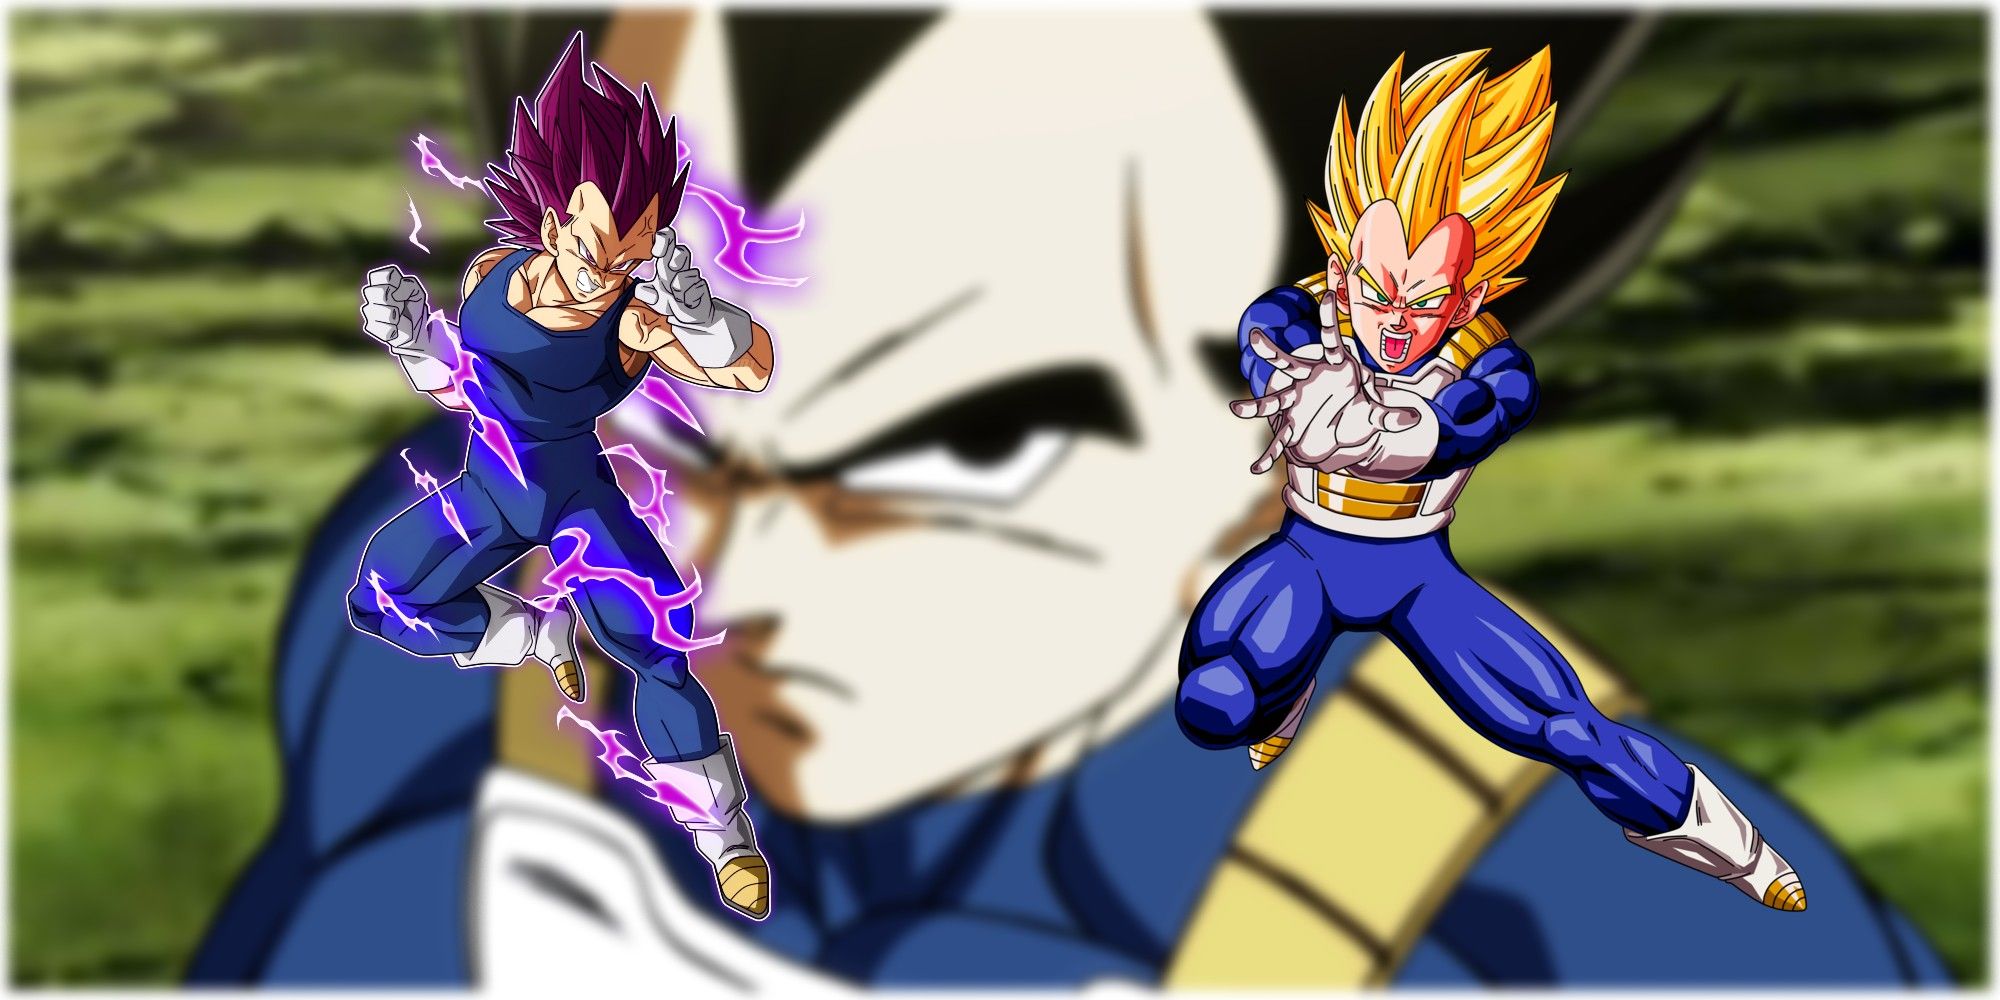 How to tell the difference between Super Saiyan 1 and 2 - Quora